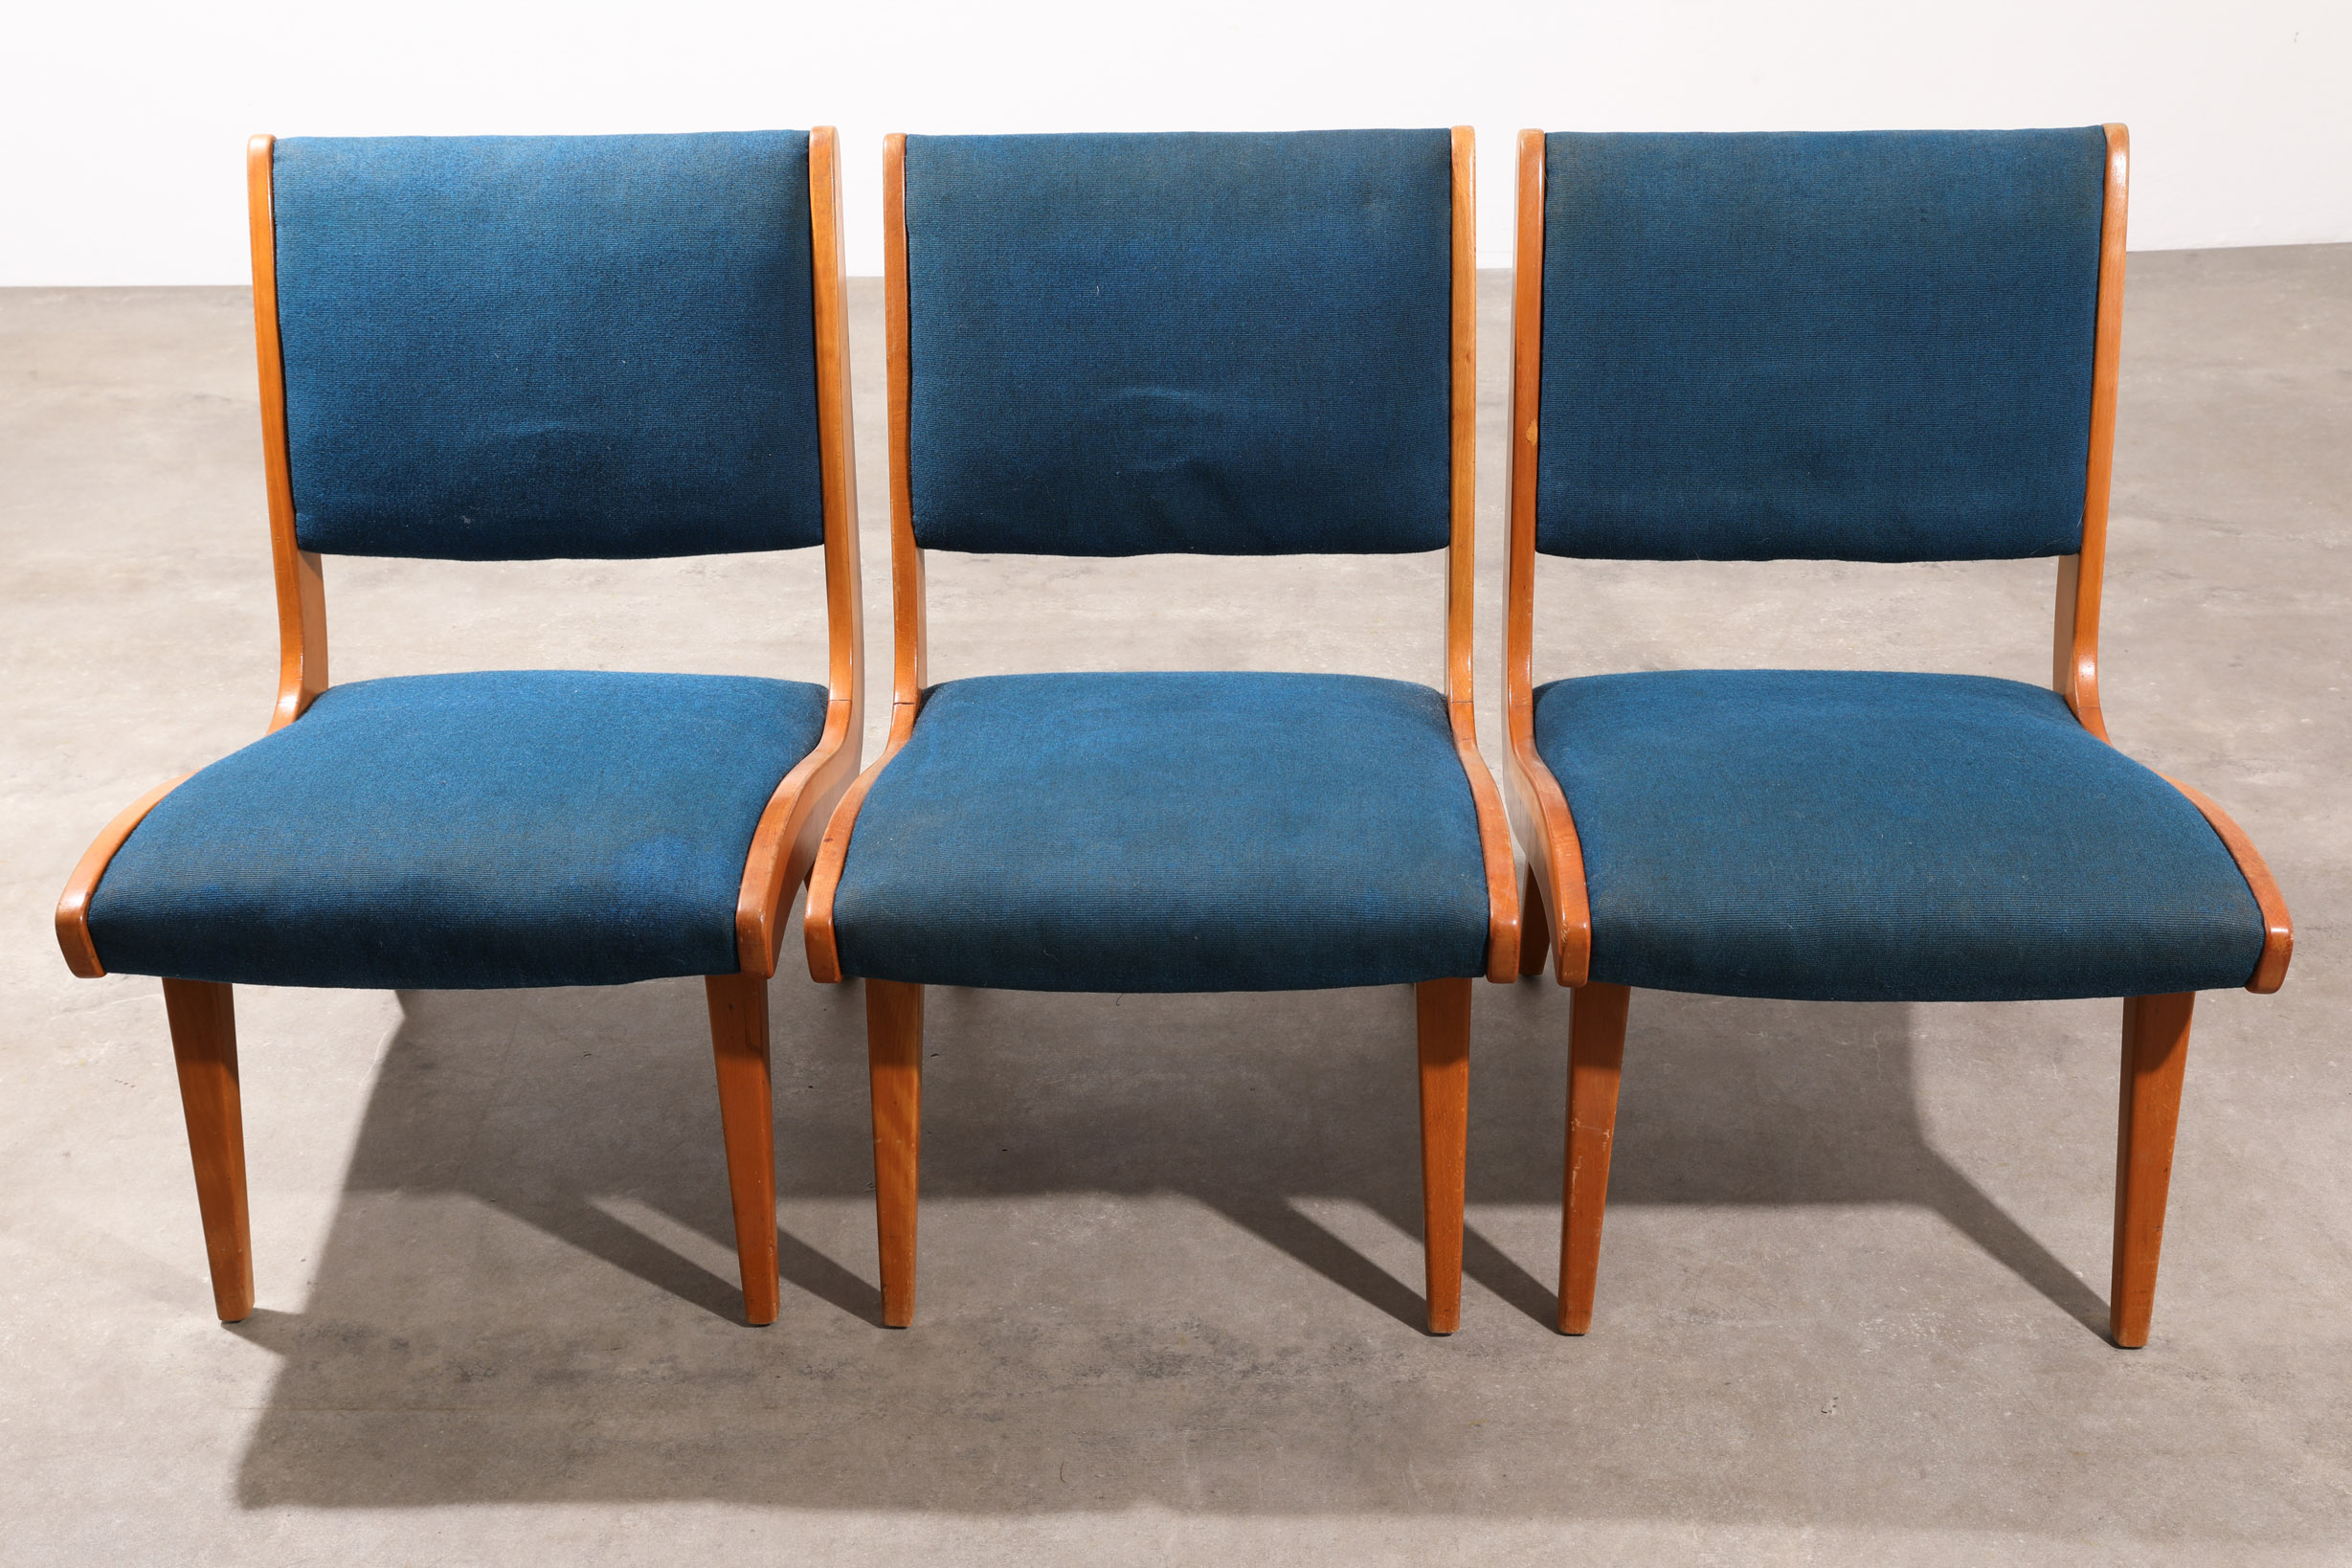 Jens Risom, Walter Knoll, 3 Armchairs, model Vostra - Image 2 of 3